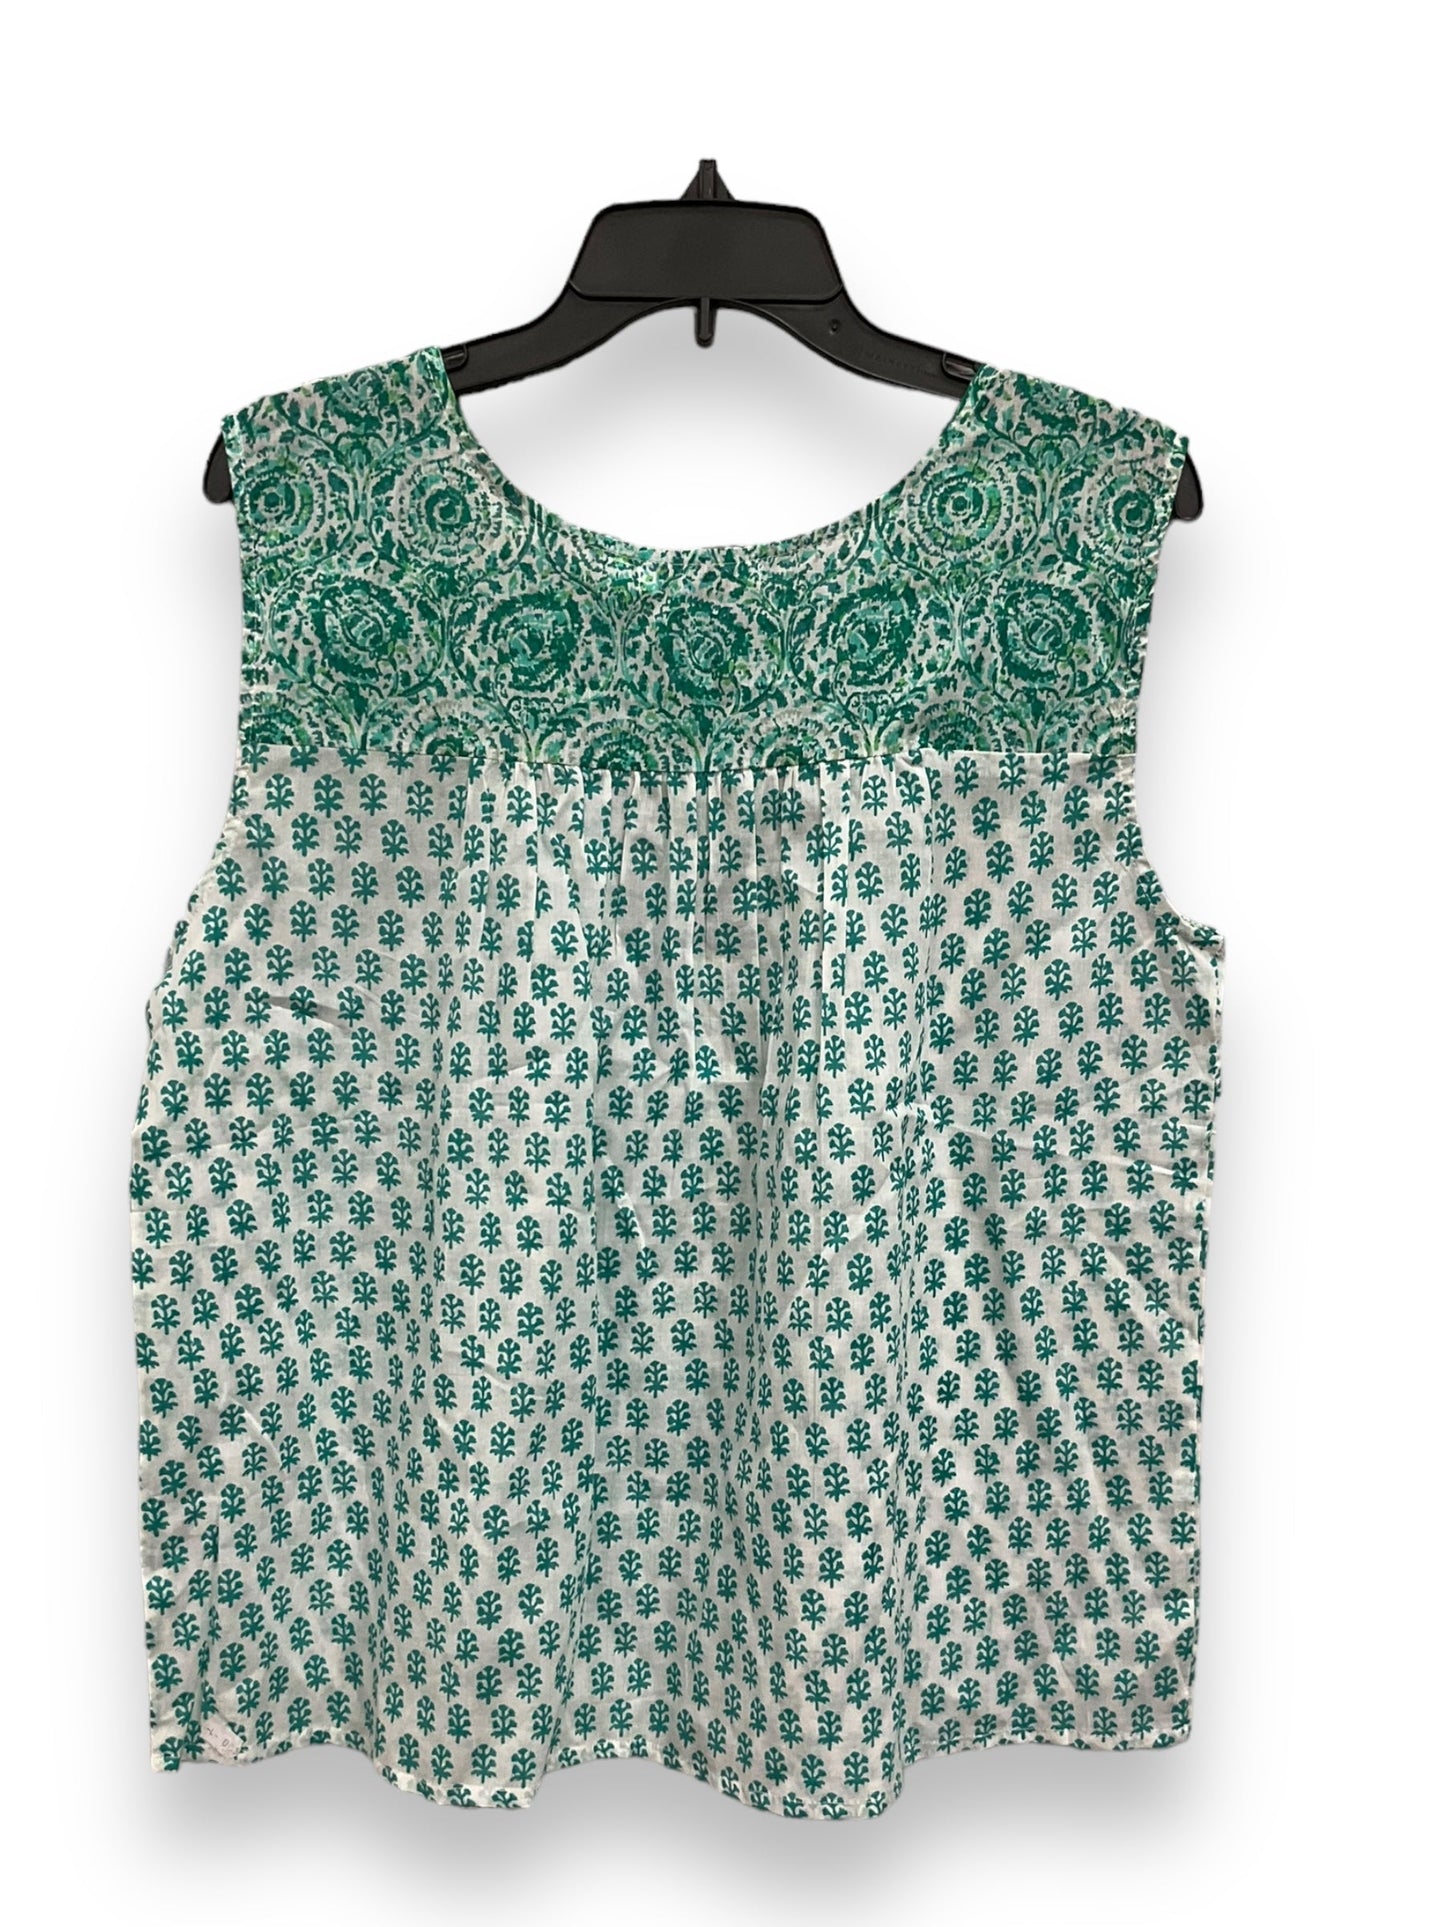 Green & White Top Sleeveless Cmb, Size L